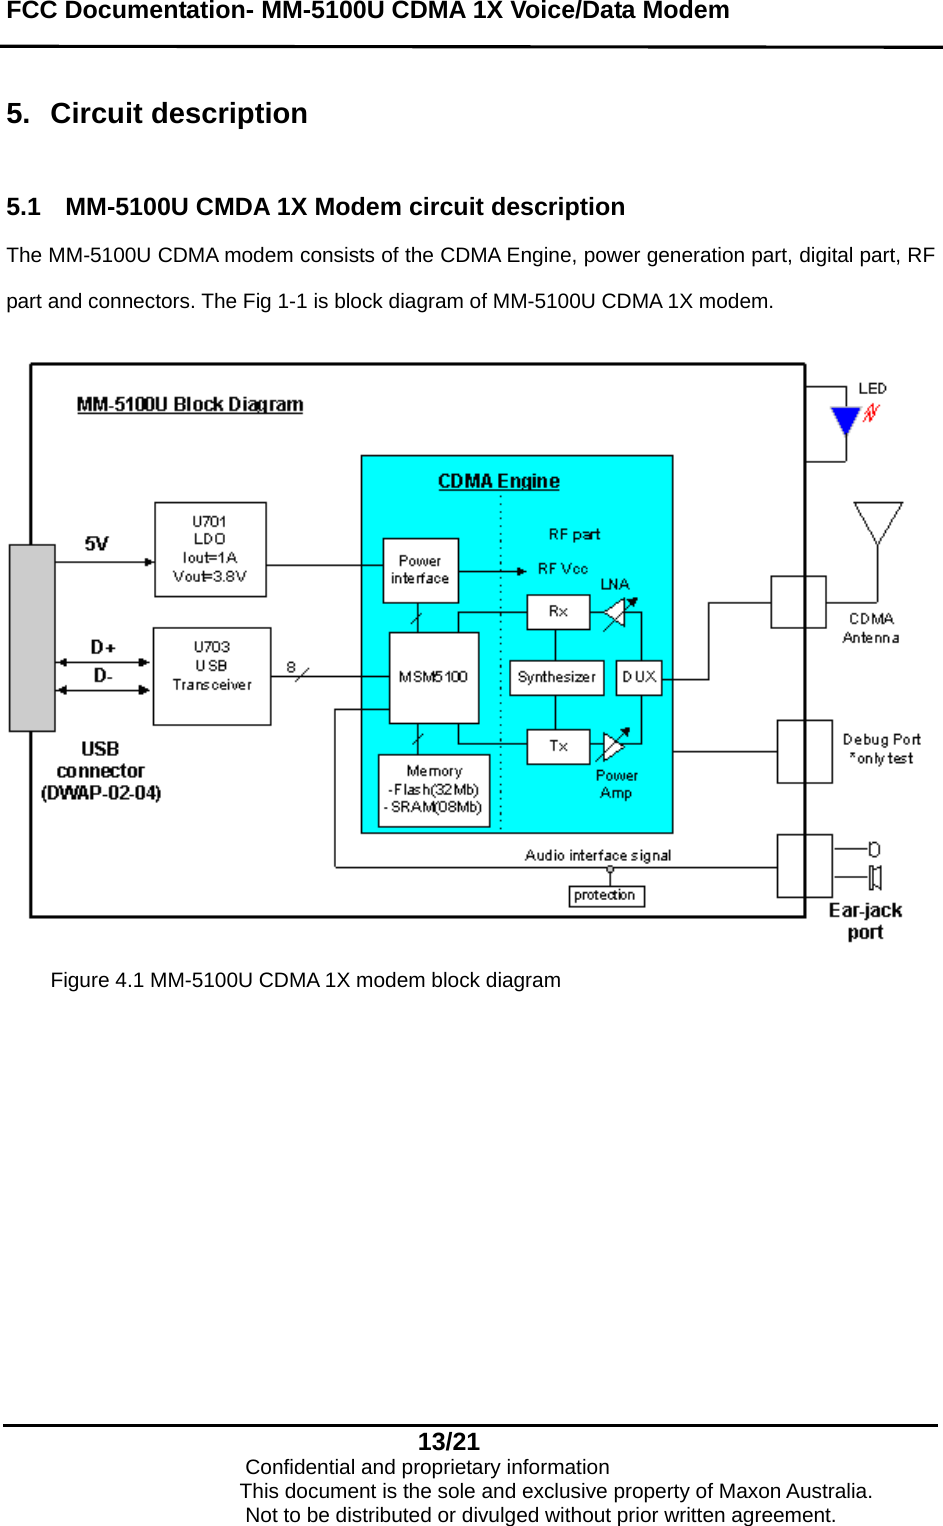 FCC Documentation- MM-5100U CDMA 1X Voice/Data Modem   5. Circuit description  5.1  MM-5100U CMDA 1X Modem circuit description The MM-5100U CDMA modem consists of the CDMA Engine, power generation part, digital part, RF part and connectors. The Fig 1-1 is block diagram of MM-5100U CDMA 1X modem.   Figure 4.1 MM-5100U CDMA 1X modem block diagram  13/21                            Confidential and proprietary information                       This document is the sole and exclusive property of Maxon Australia.                           Not to be distributed or divulged without prior written agreement. 